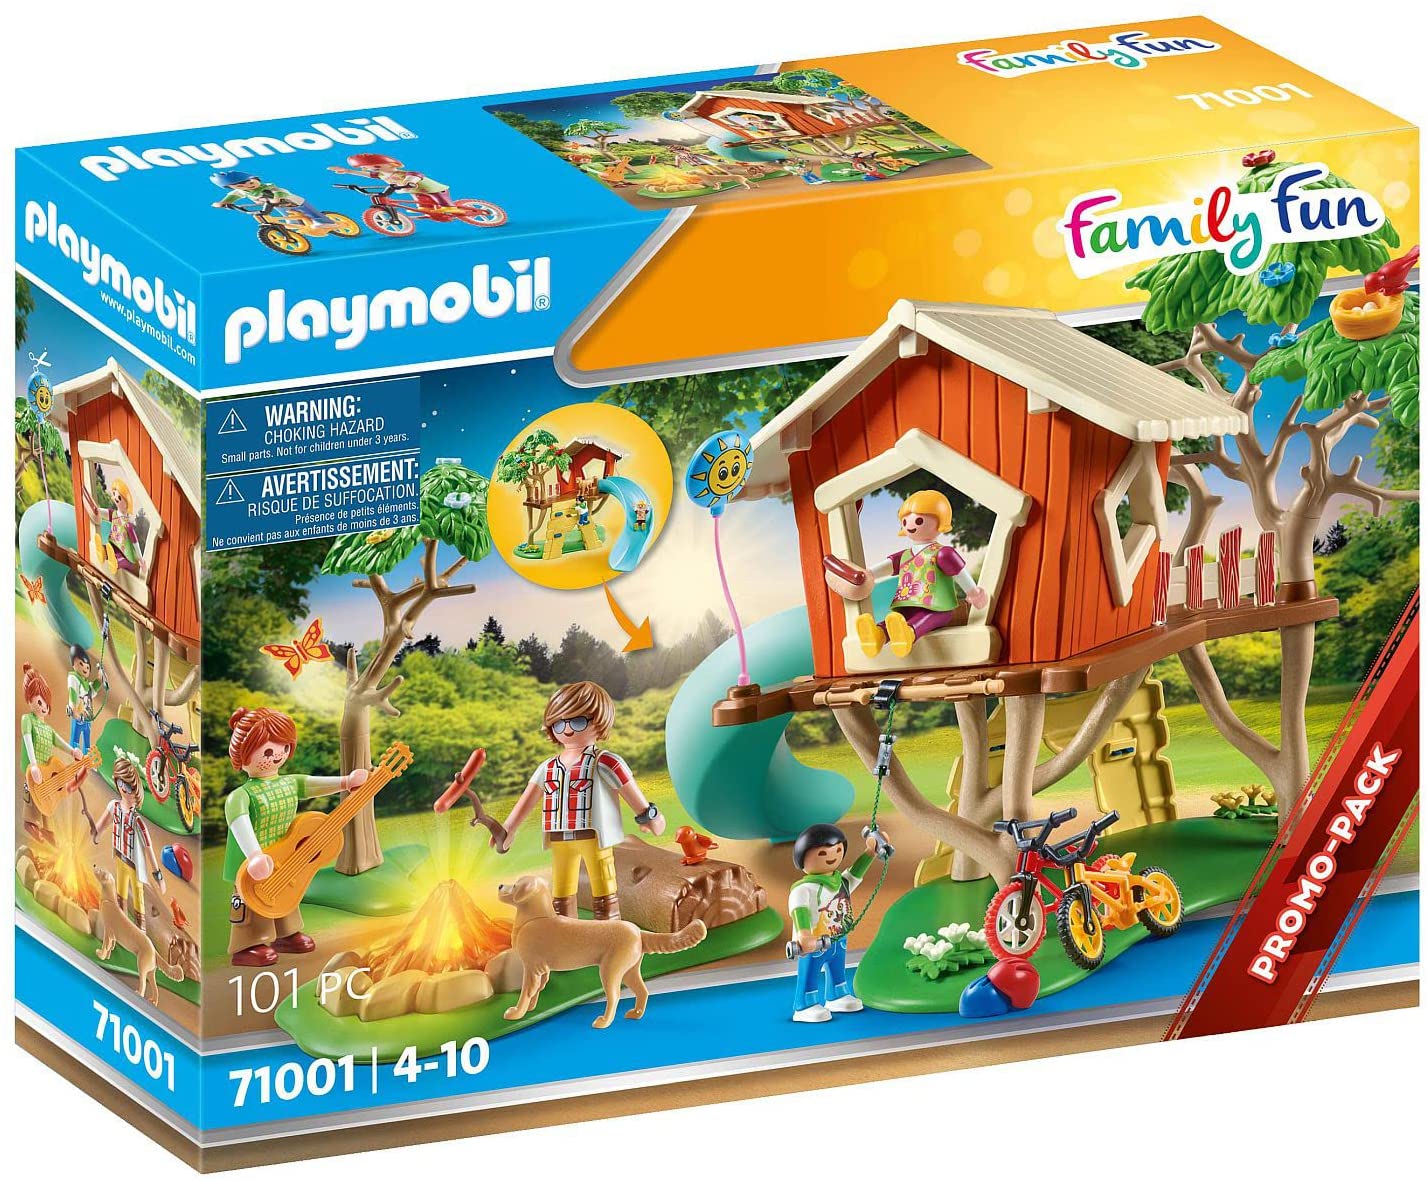 PLAYMOBIL Family Fun 71001 Adventure Tree House with Slide, LED Campfire, Toy for Children from 4 Years